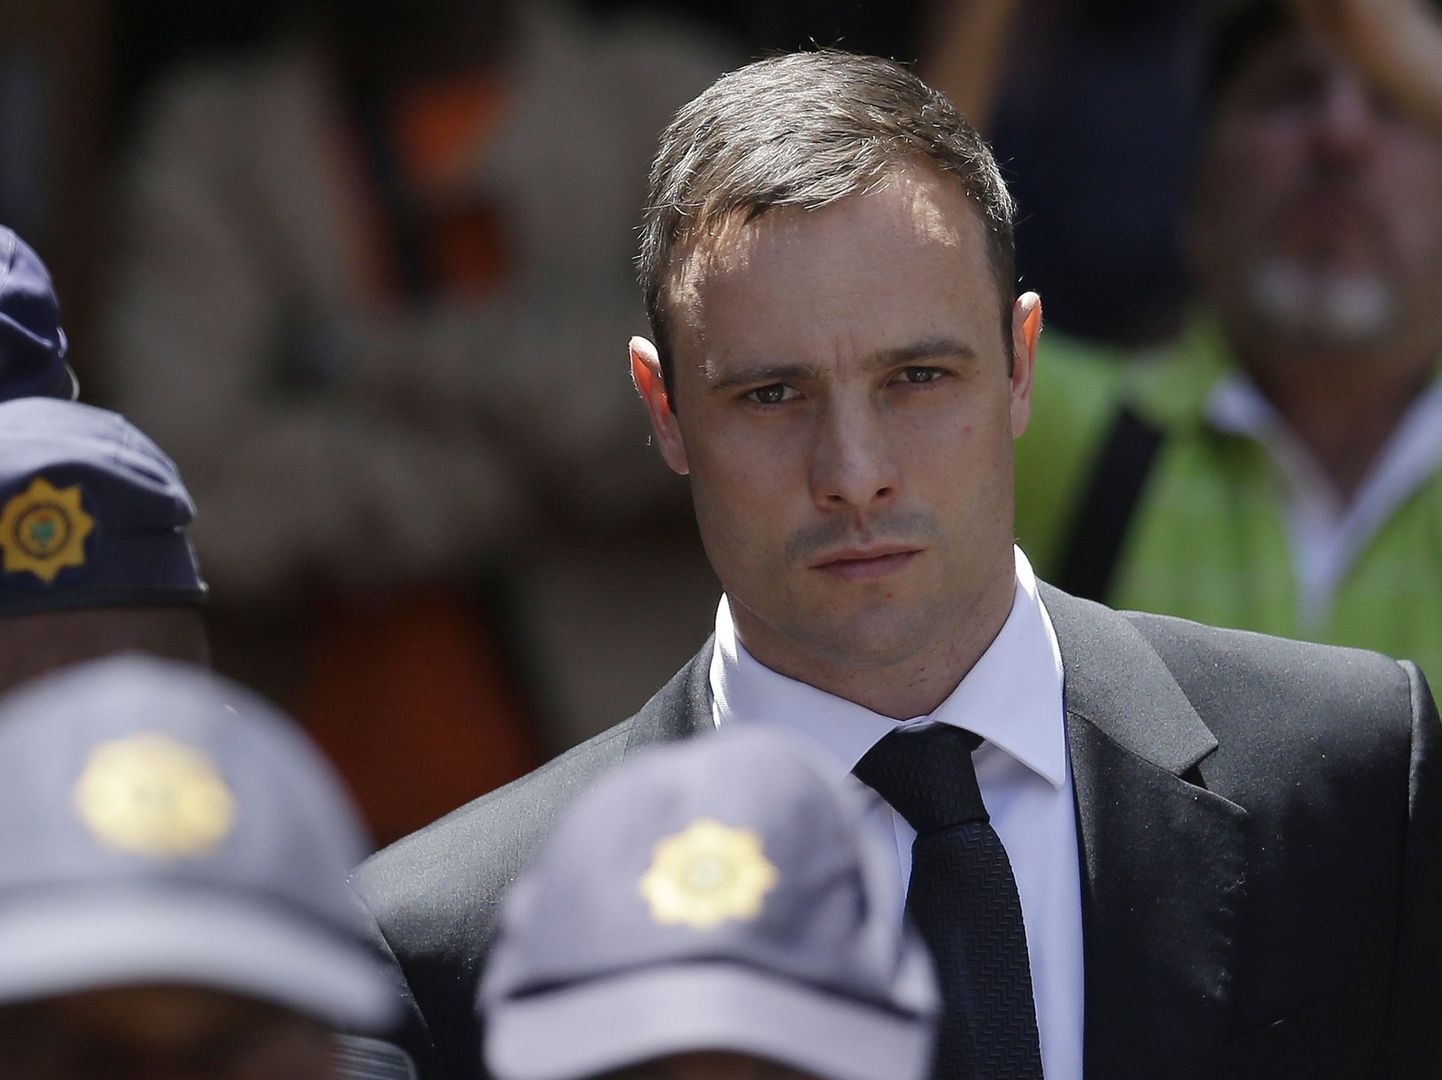 FILE - In this Friday, Oct. 17, 2014 file photo, Oscar Pistorius is escorted by police officers as he leaves the high court in Pretoria, South Africa.  Pistorius lawyers said Tuesday Feb. 27, 2015, that they will challenge a court decision to allow prosecutors to take the case to the Supreme Court seeking to convict the Olympic runner of the more serious crime of murder, for shooting girlfriend Reeva Steenkamp in 2013. (AP Photo/Themba Hadebe, FILE)